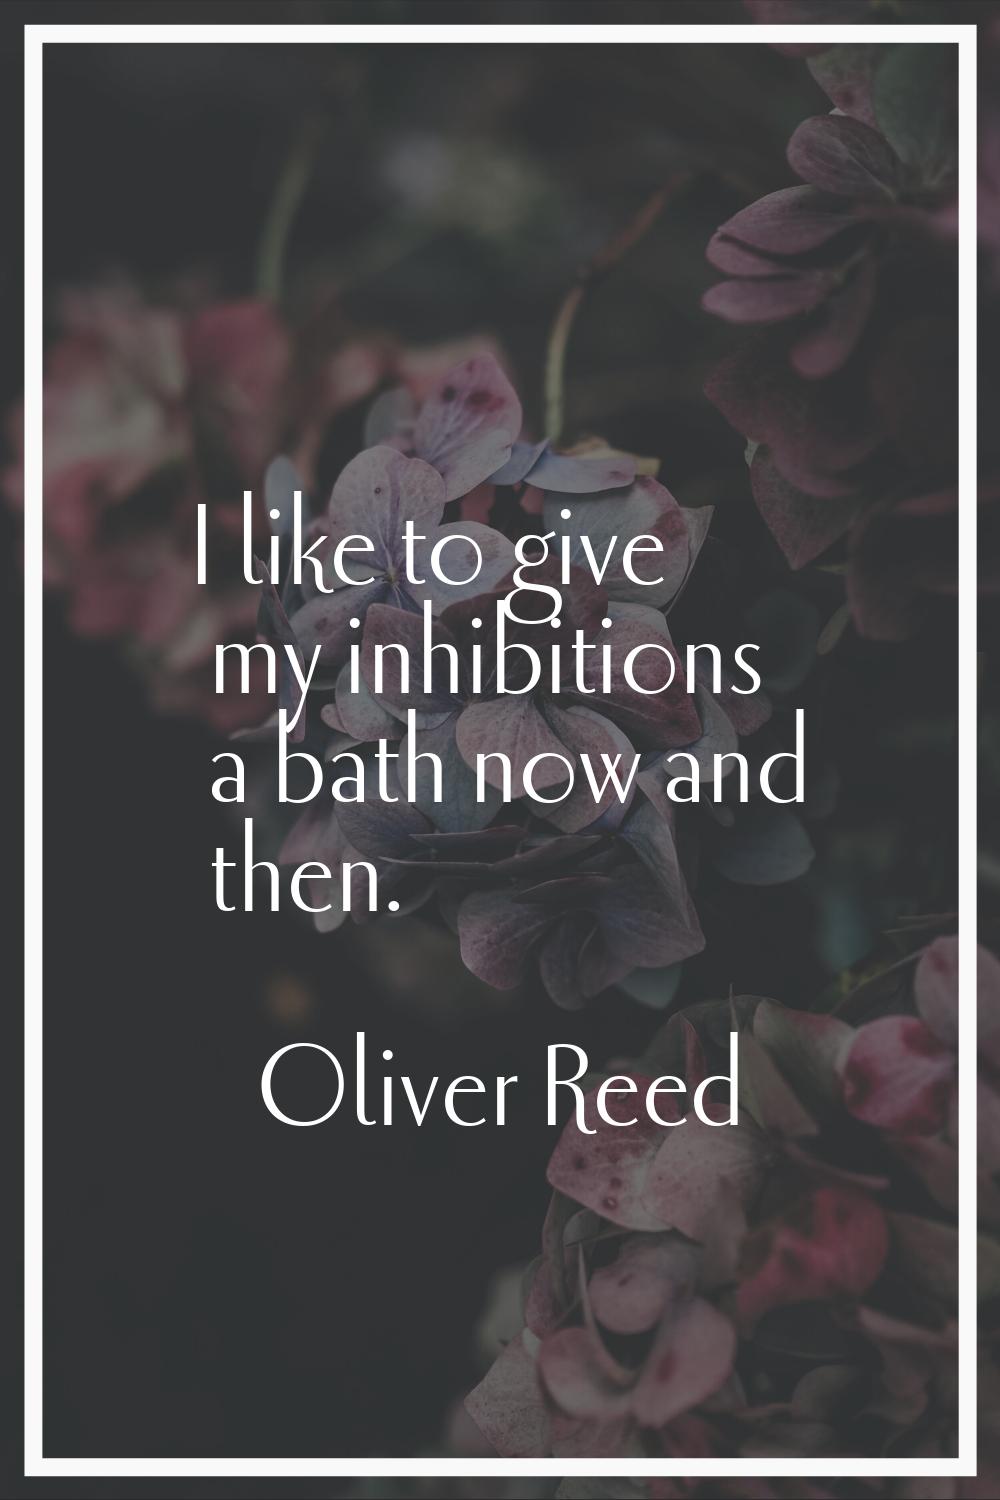 I like to give my inhibitions a bath now and then.